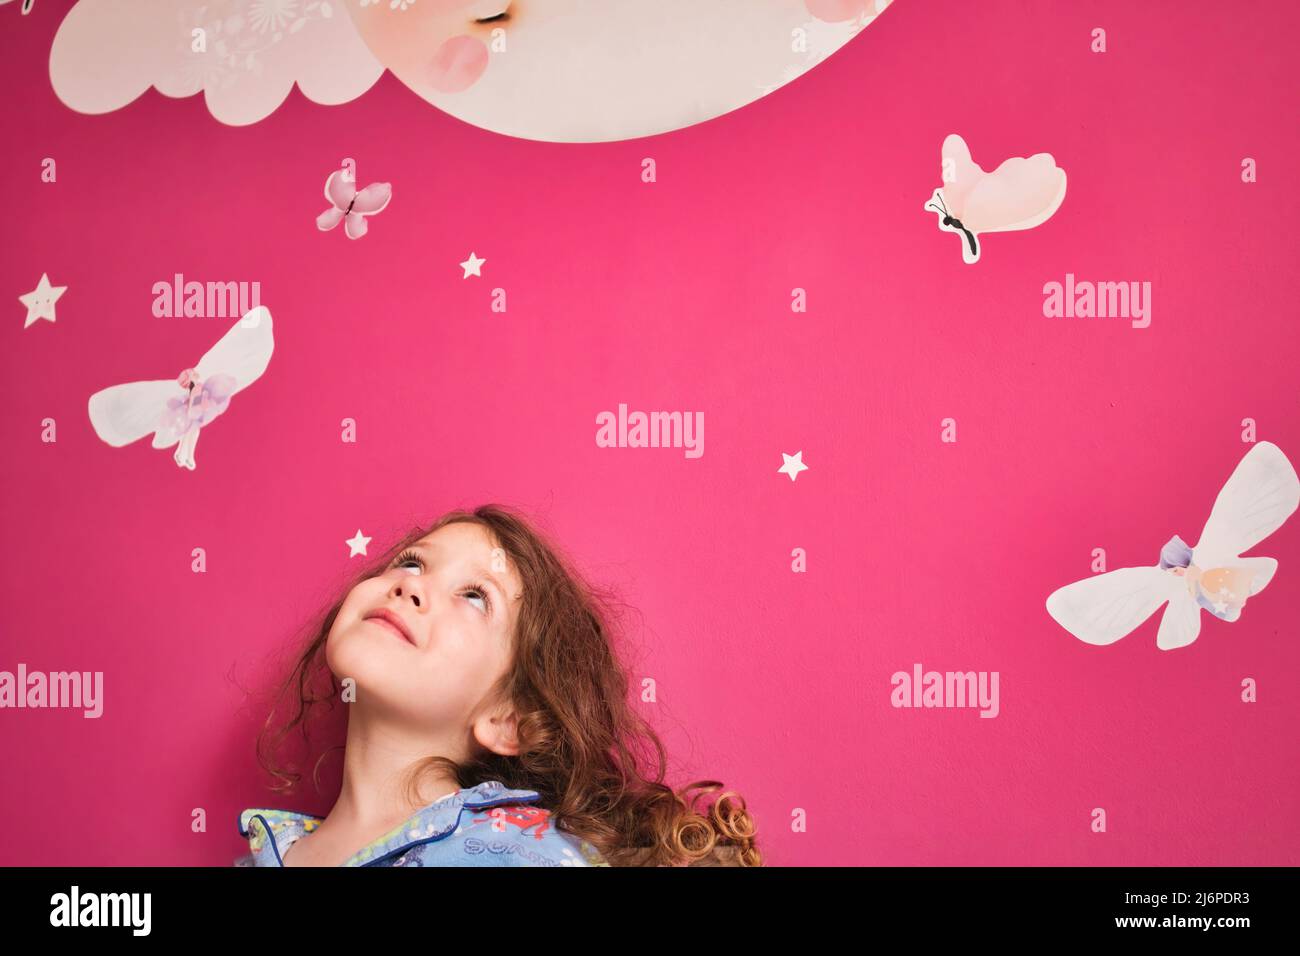 Young cute girl wearing pajamas looking up at a pink wall with decal stars, moon and fairies Stock Photo